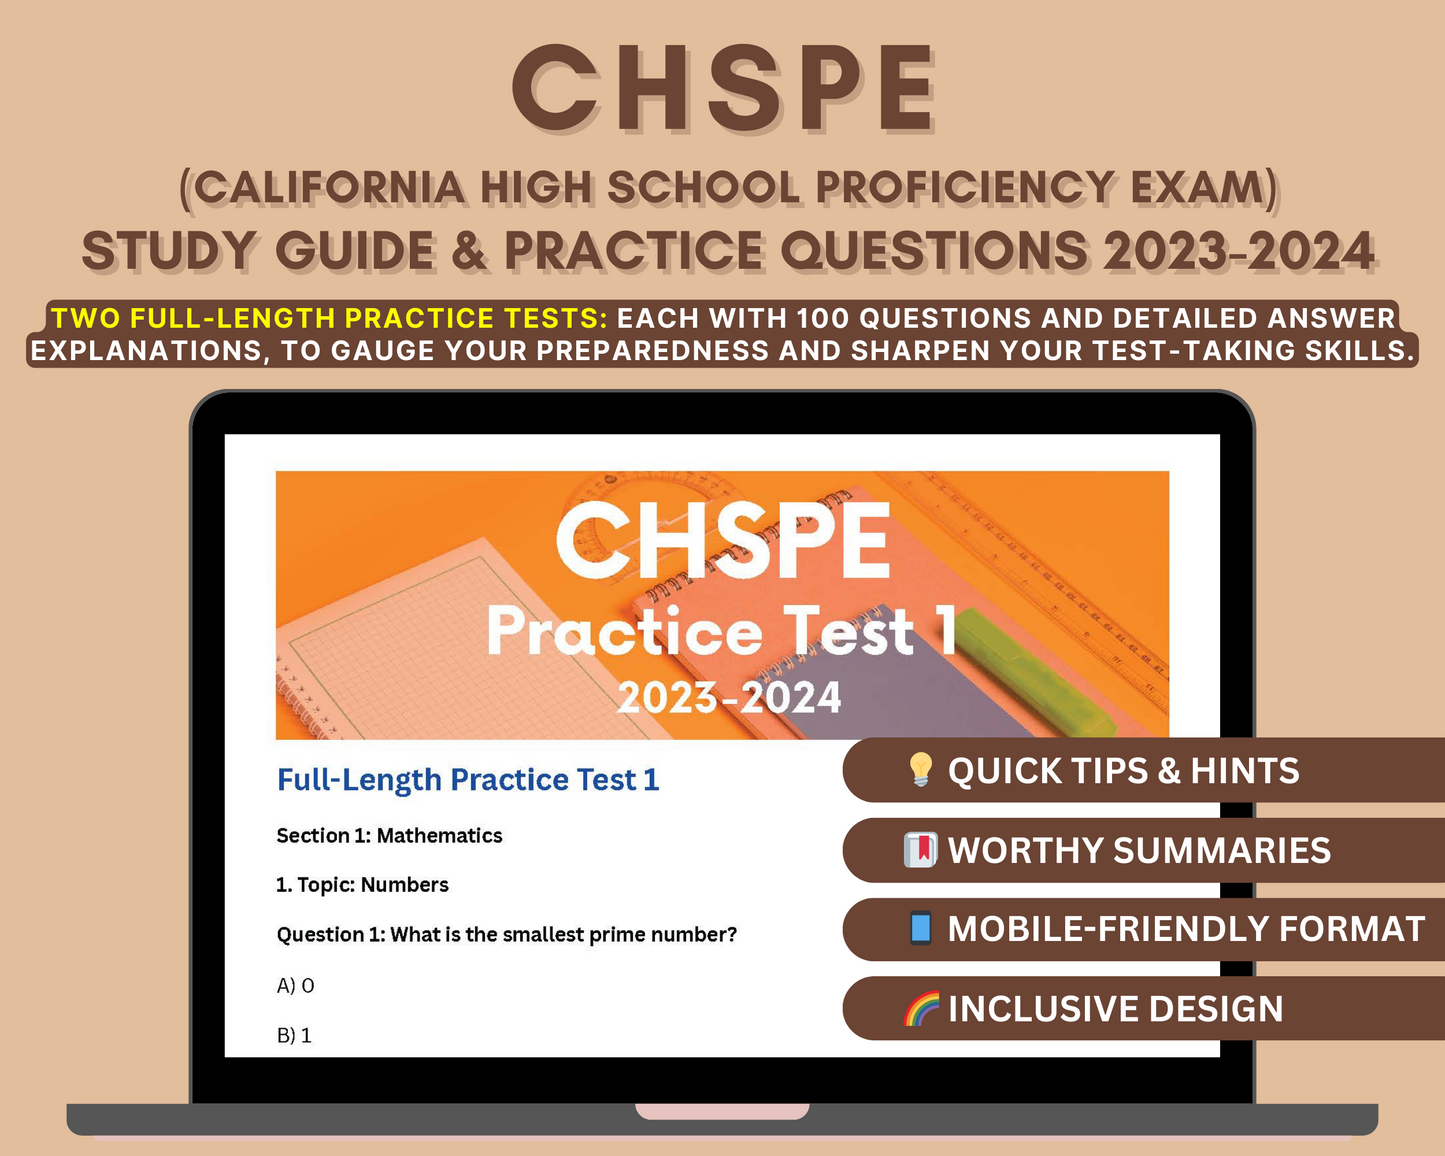 CHSPE Study Guide 2023-2024: In-Depth Content Review, and Practice Tests for California High School Proficiency Exam